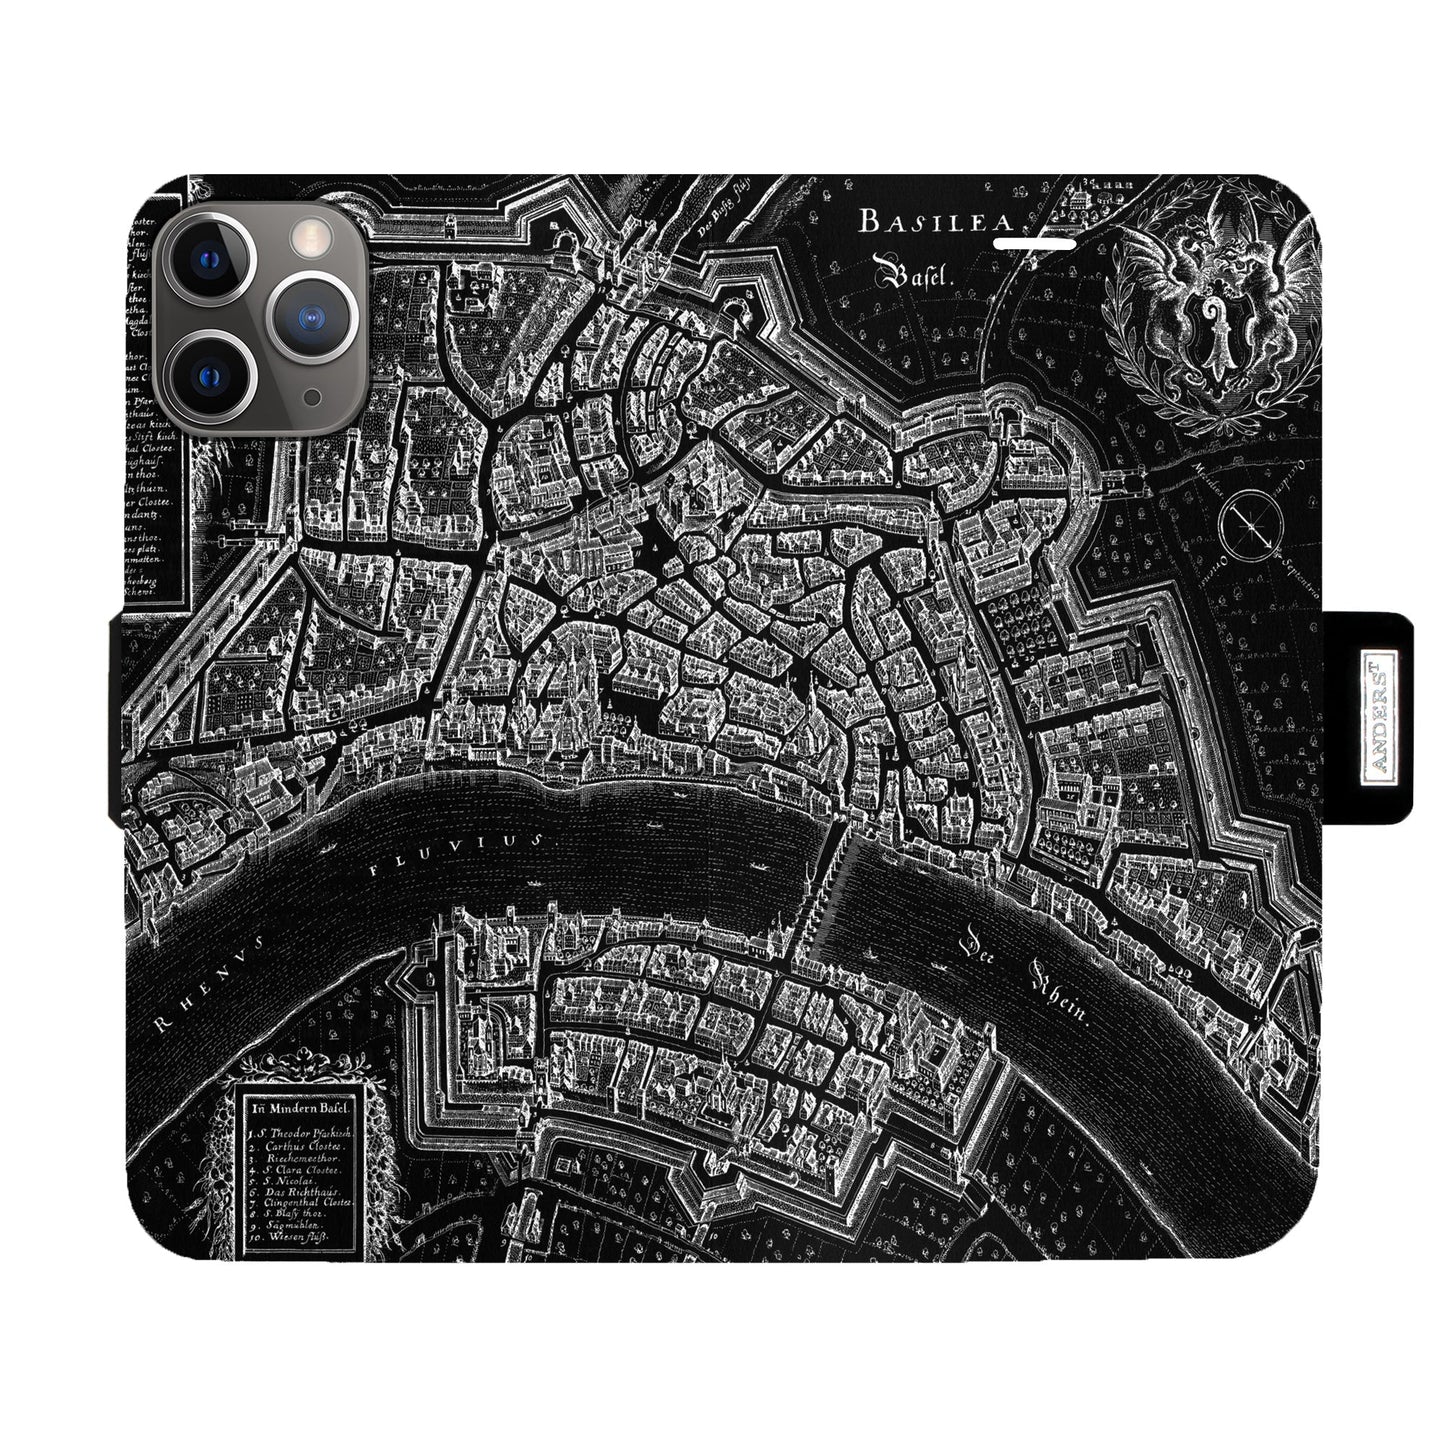 Basel Merian Negative Victor Case for iPhone 11 Pro Max